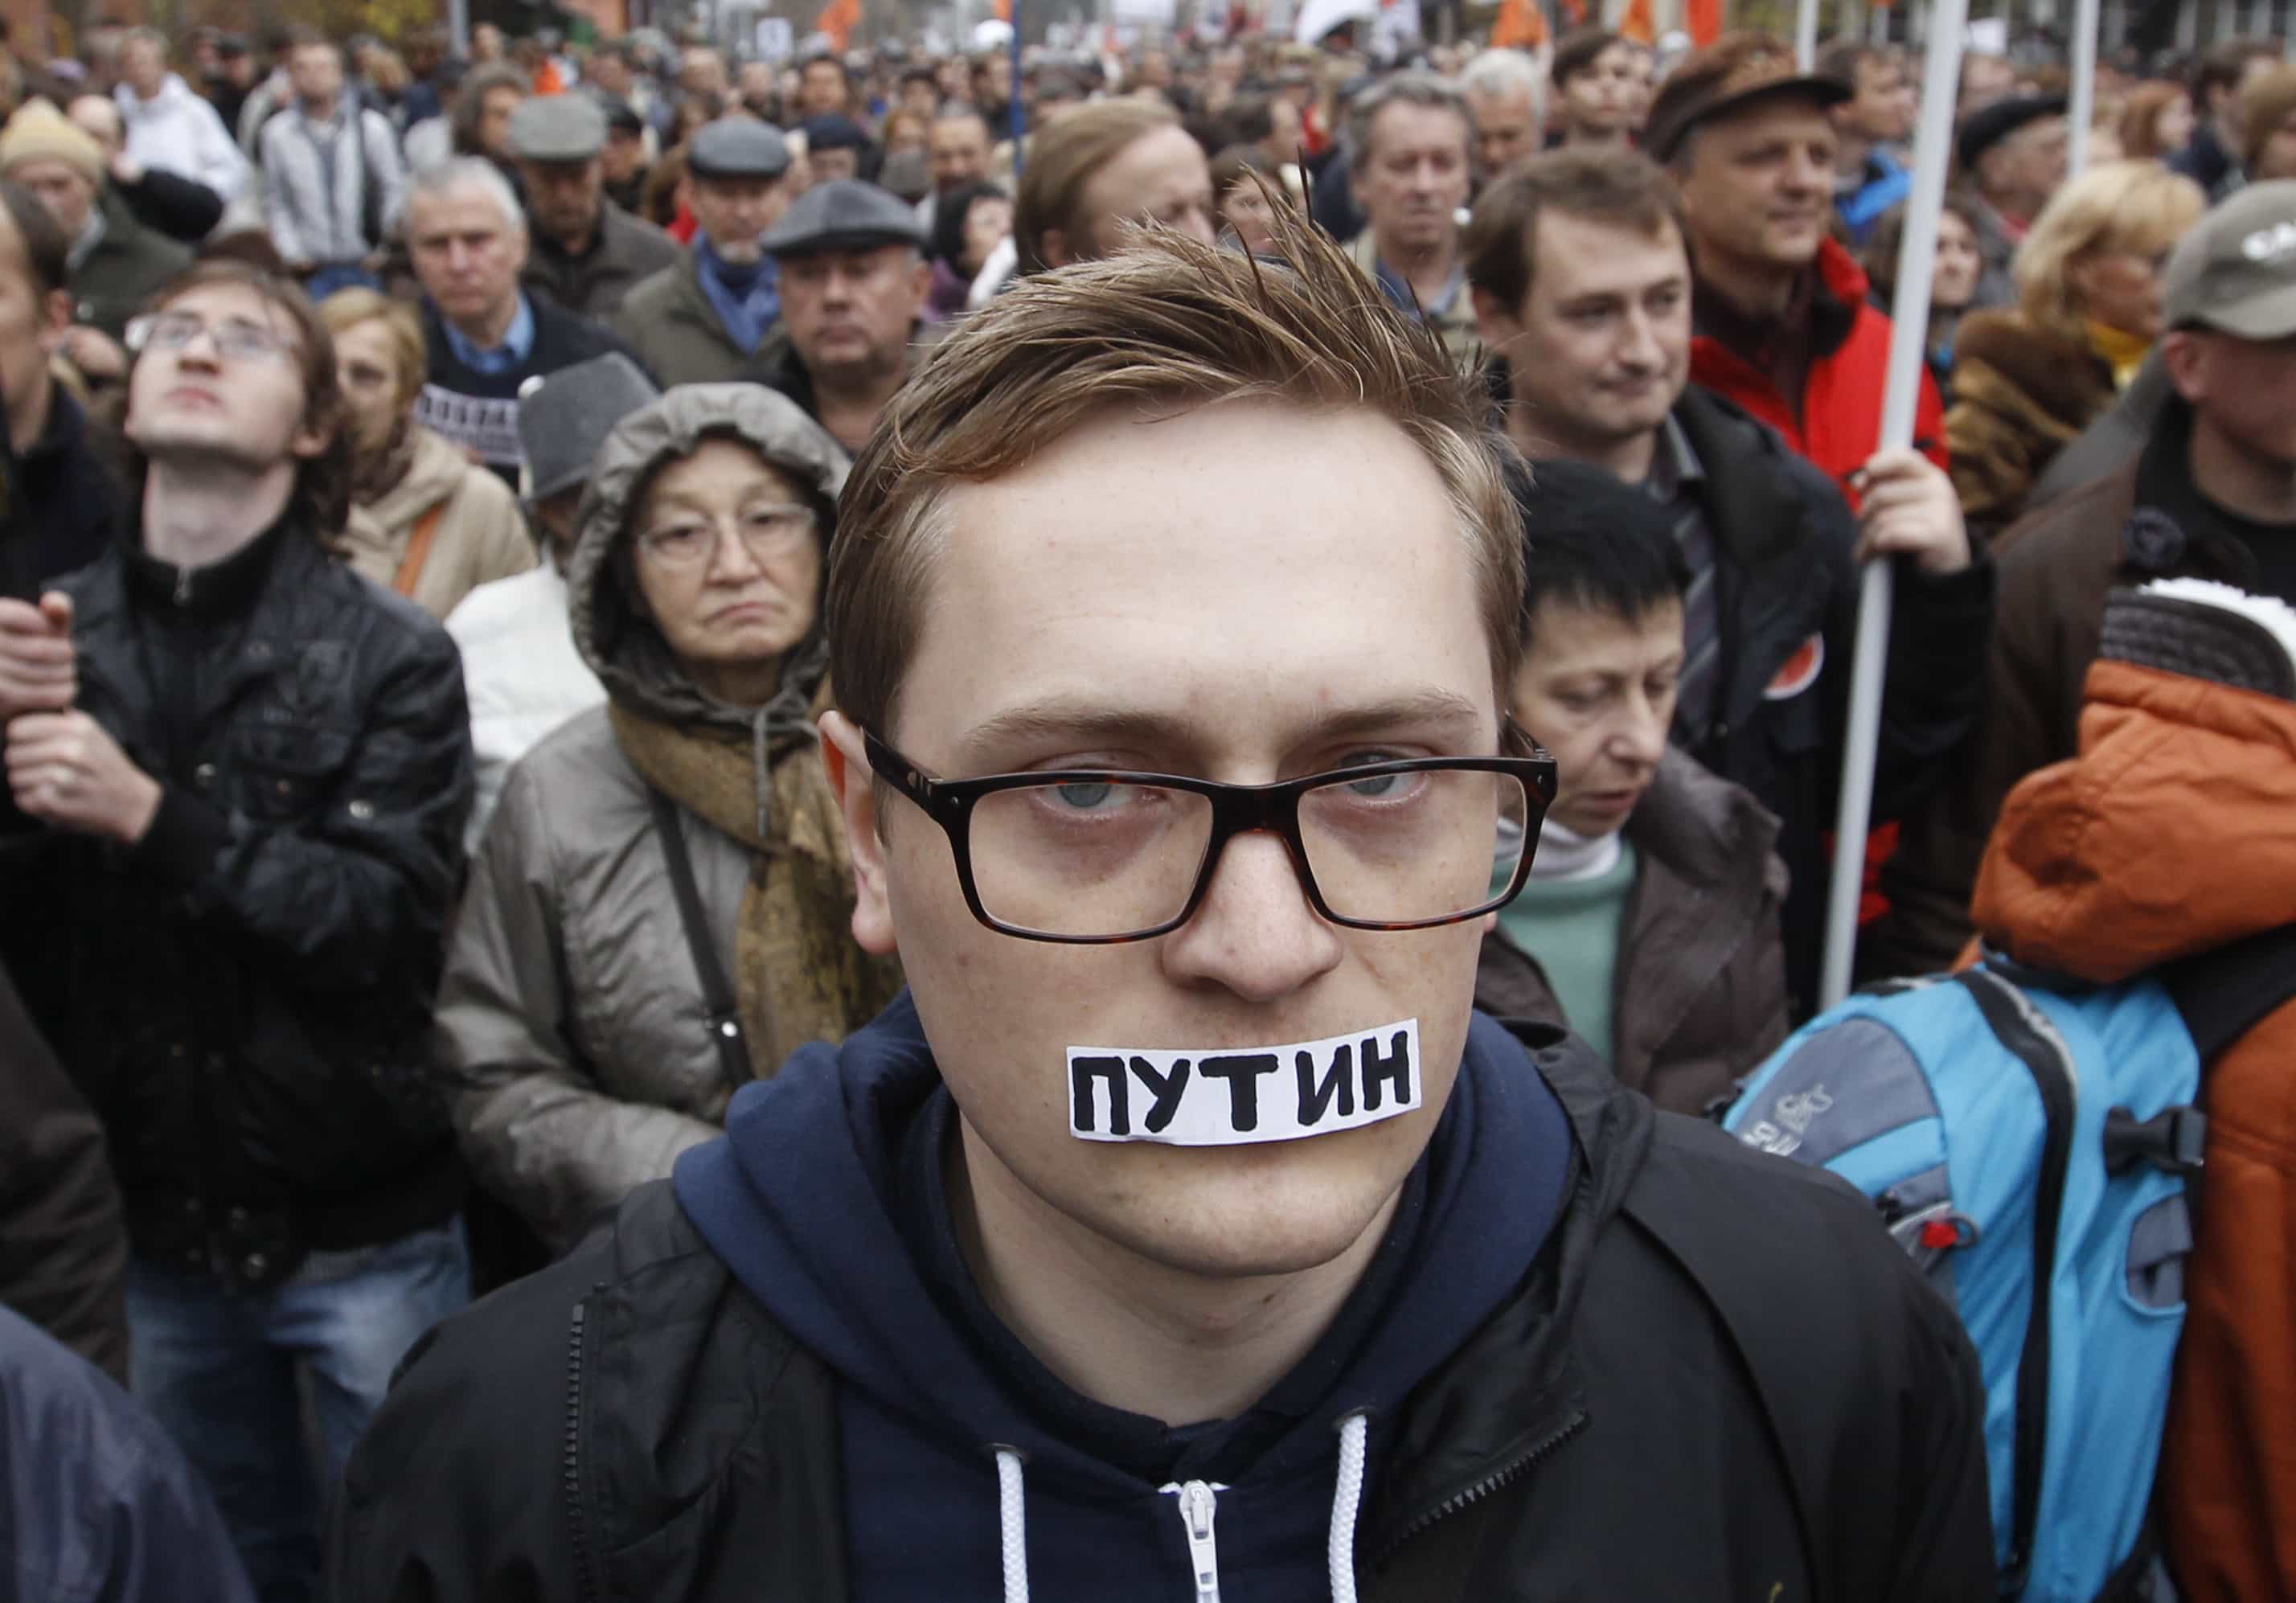 A man takes part in an opposition rally in Moscow, on 27 October 2013. Protesters demanded the release of political prisoners including anti-government activists detained in Moscow's Bolotnaya Square on May 6, 2012, the eve of President Vladimir Putin's inauguration. The sticker reads "Putin.", REUTERS/Maxim Shemetov